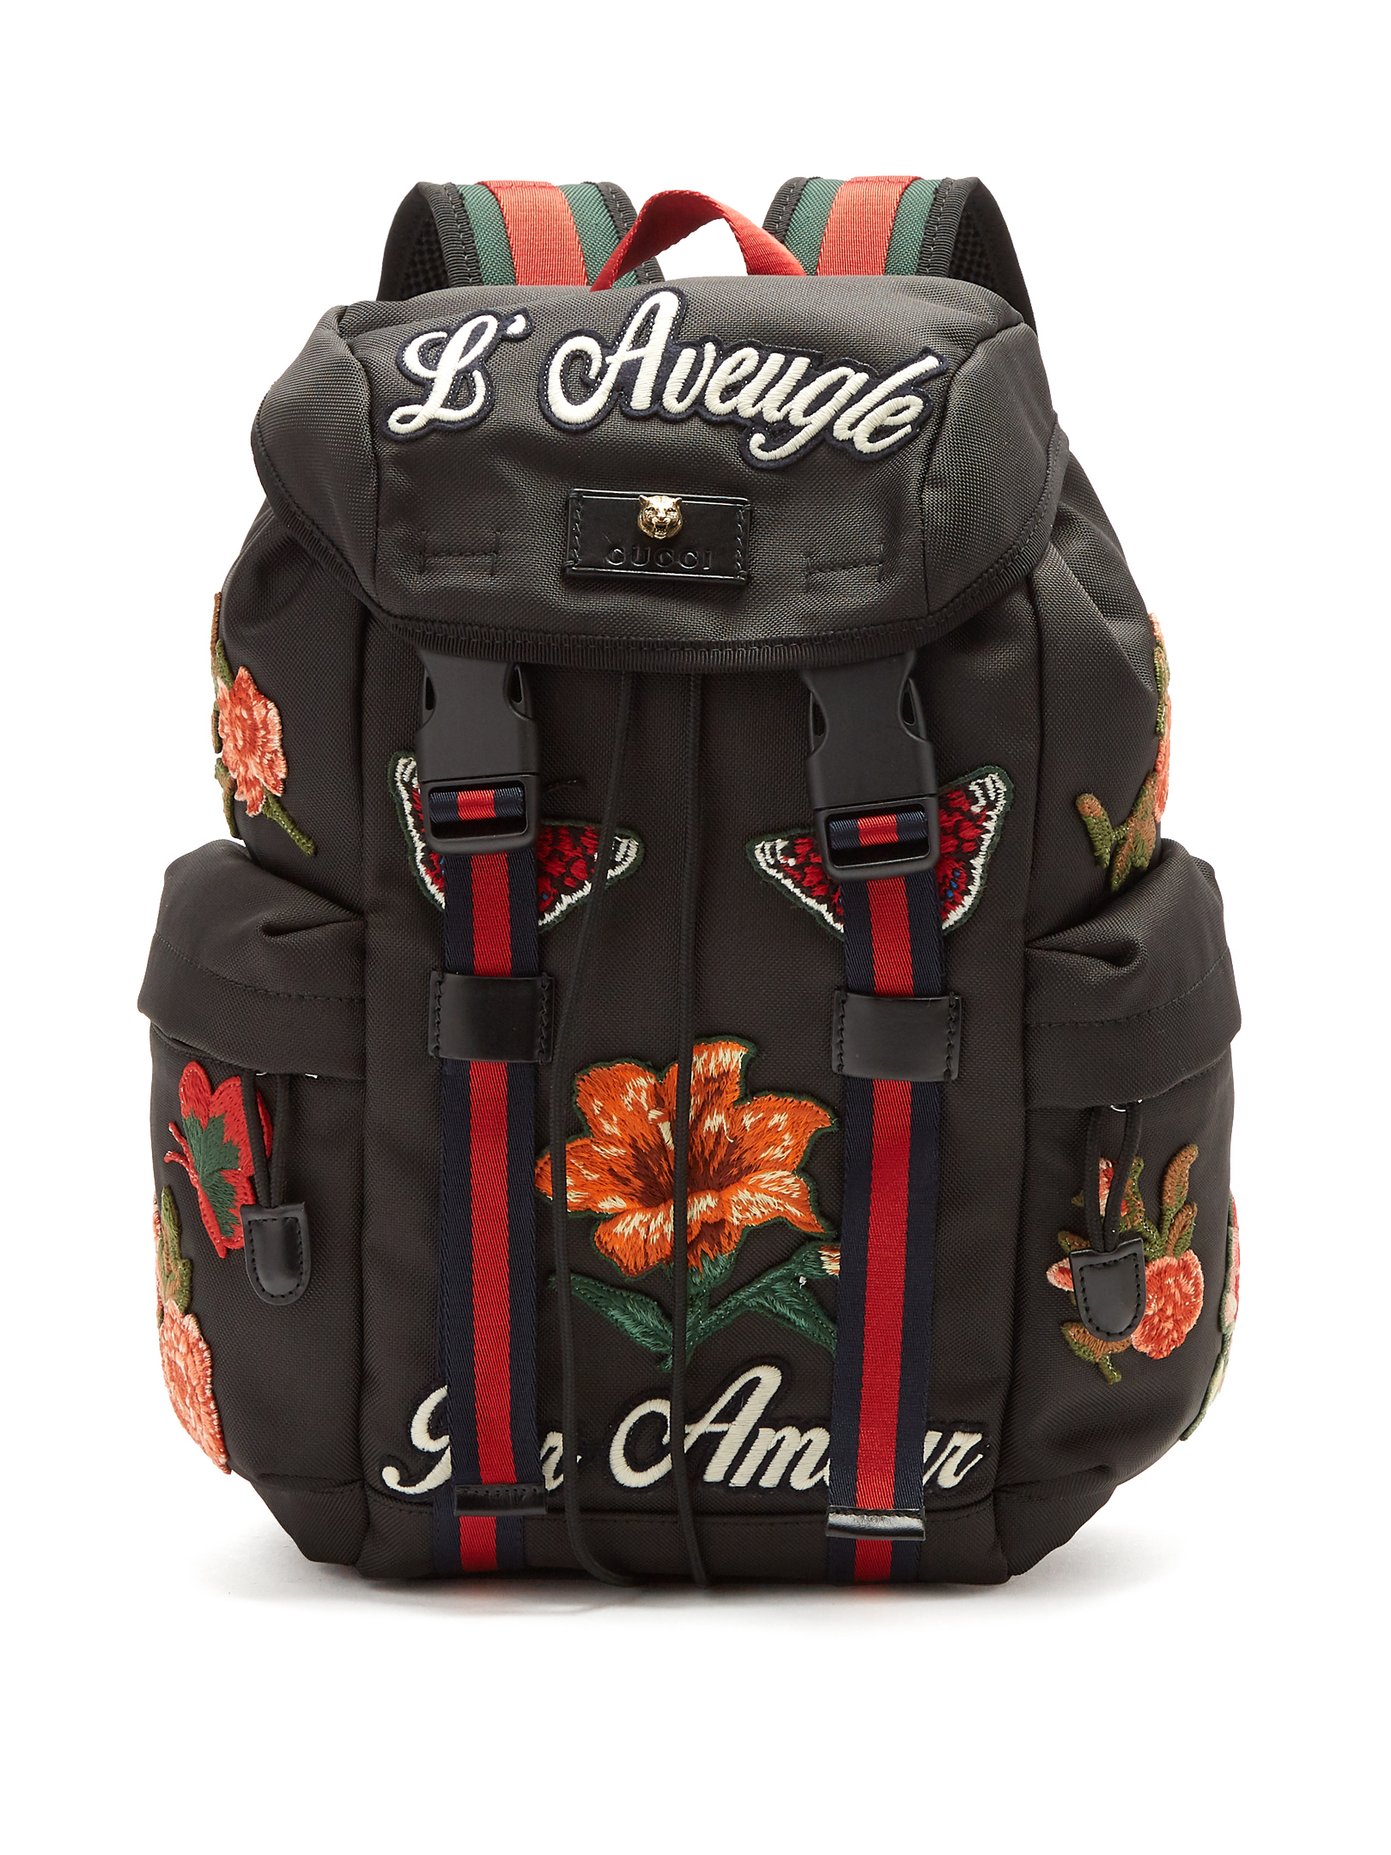 gucci floral backpack